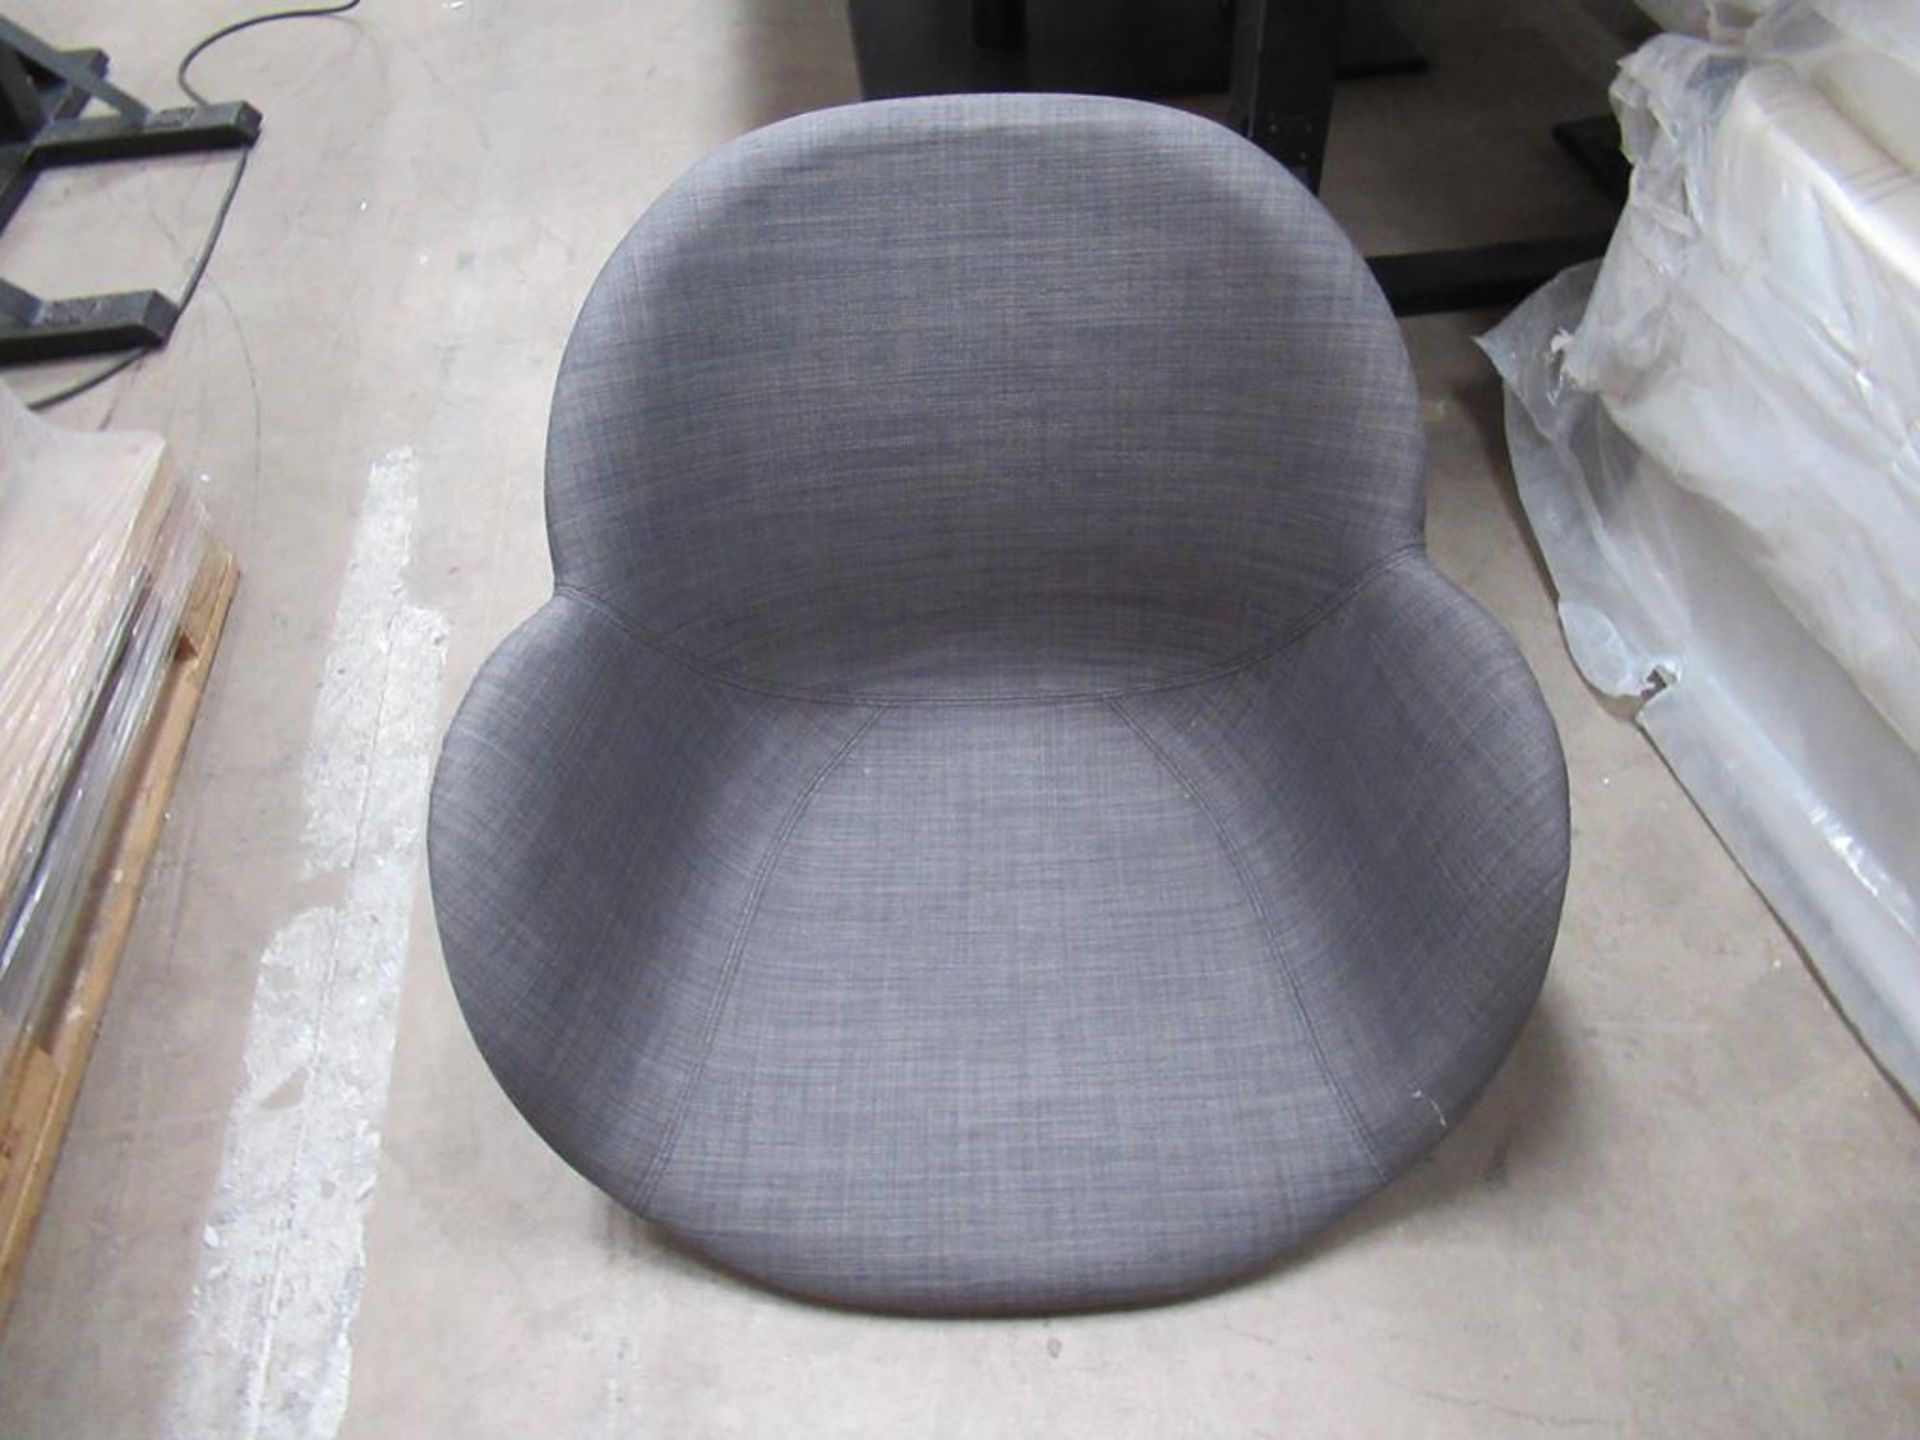 4x Shoreditch Arm Chairs in Grey - no bases